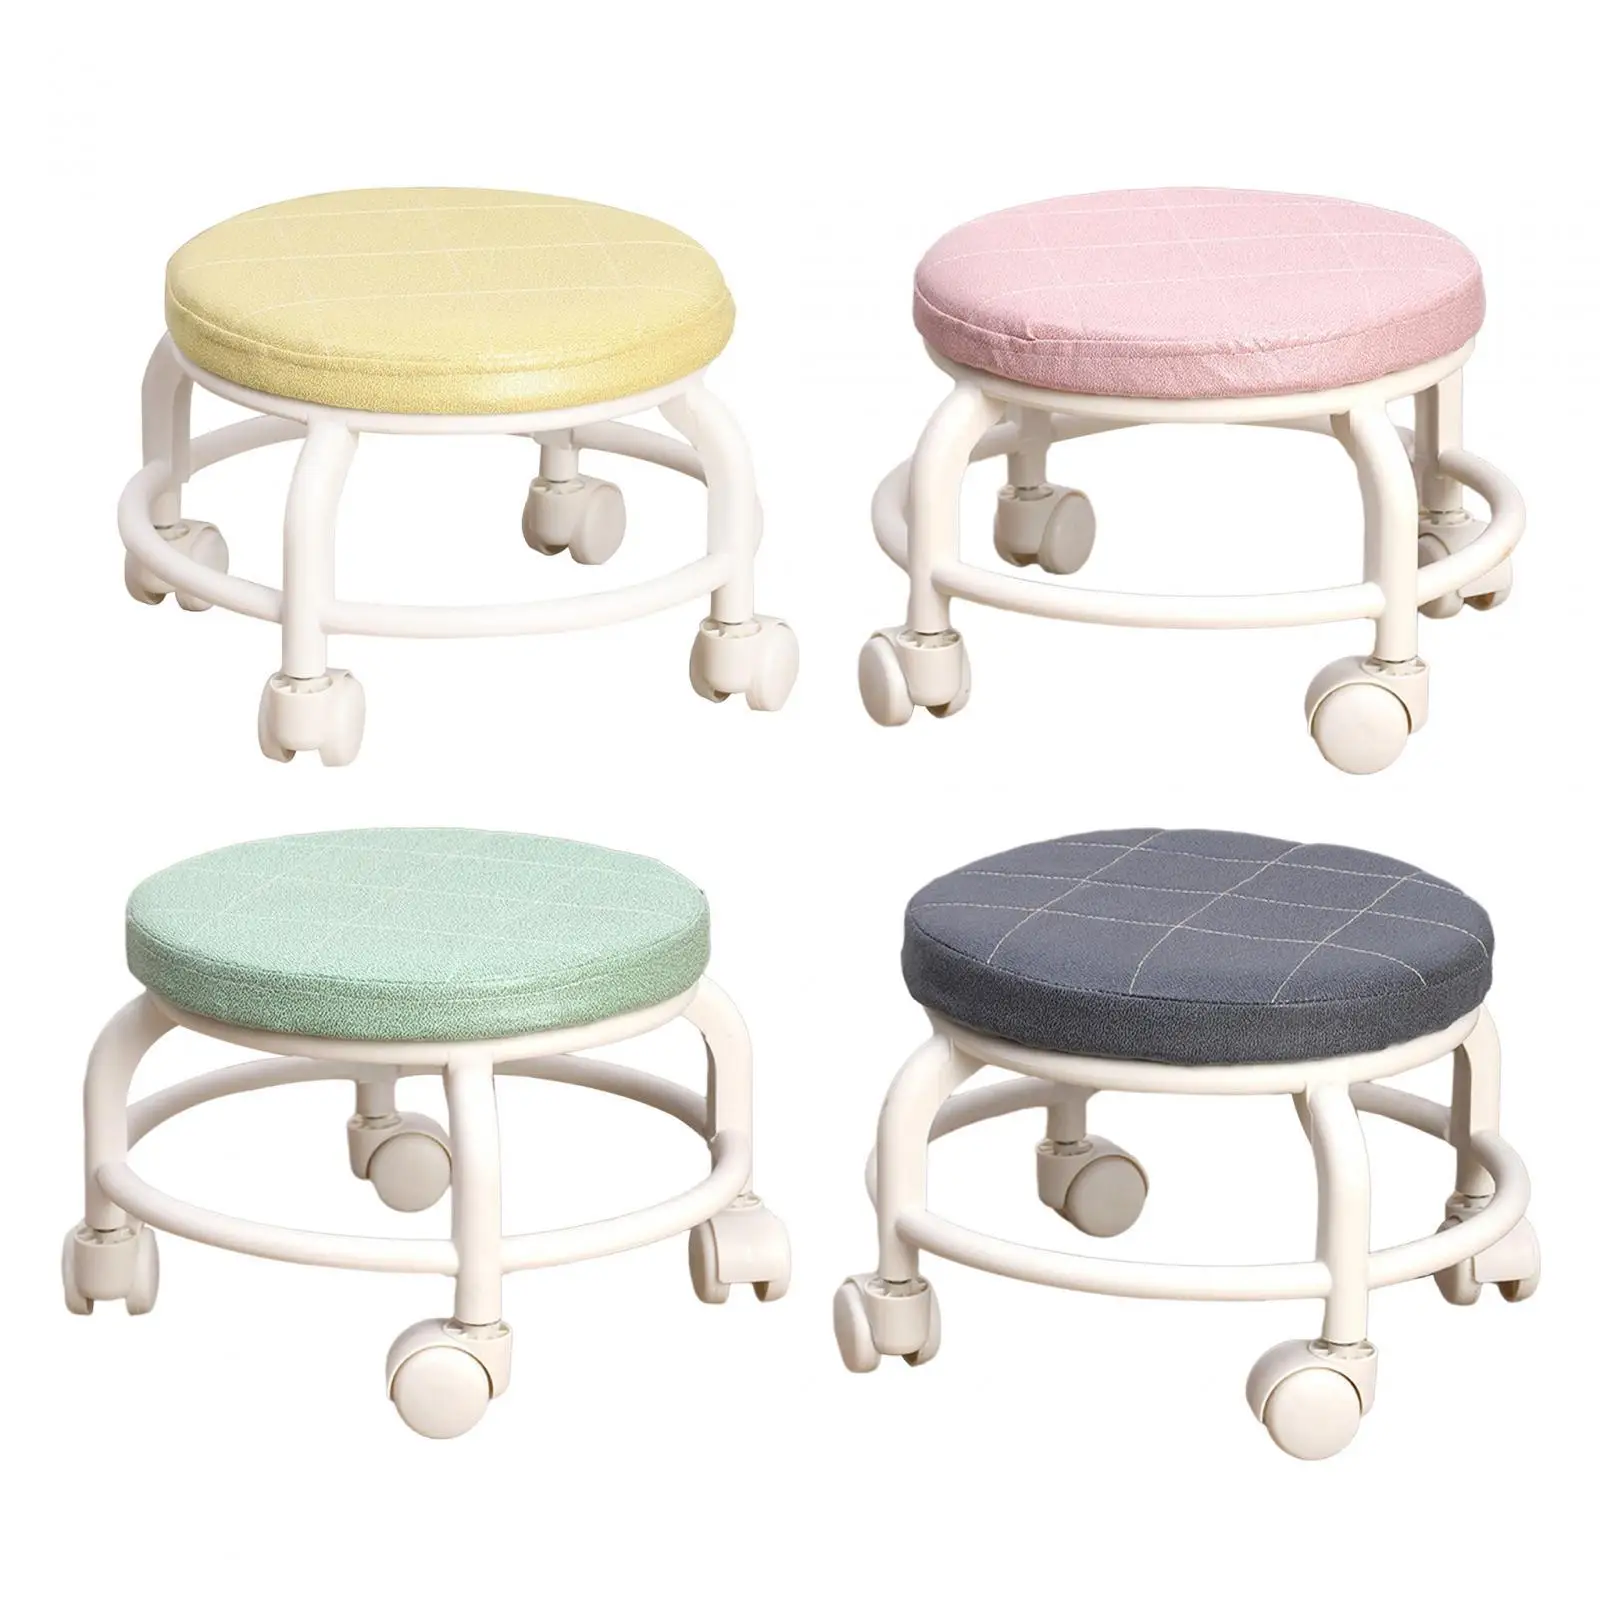 

Low Round Roller Seat Stool 360° Rotating Rolling Stool Heavy Duty Footrest Pedicure Stool Pulley Wheel Stool Salons Office Home